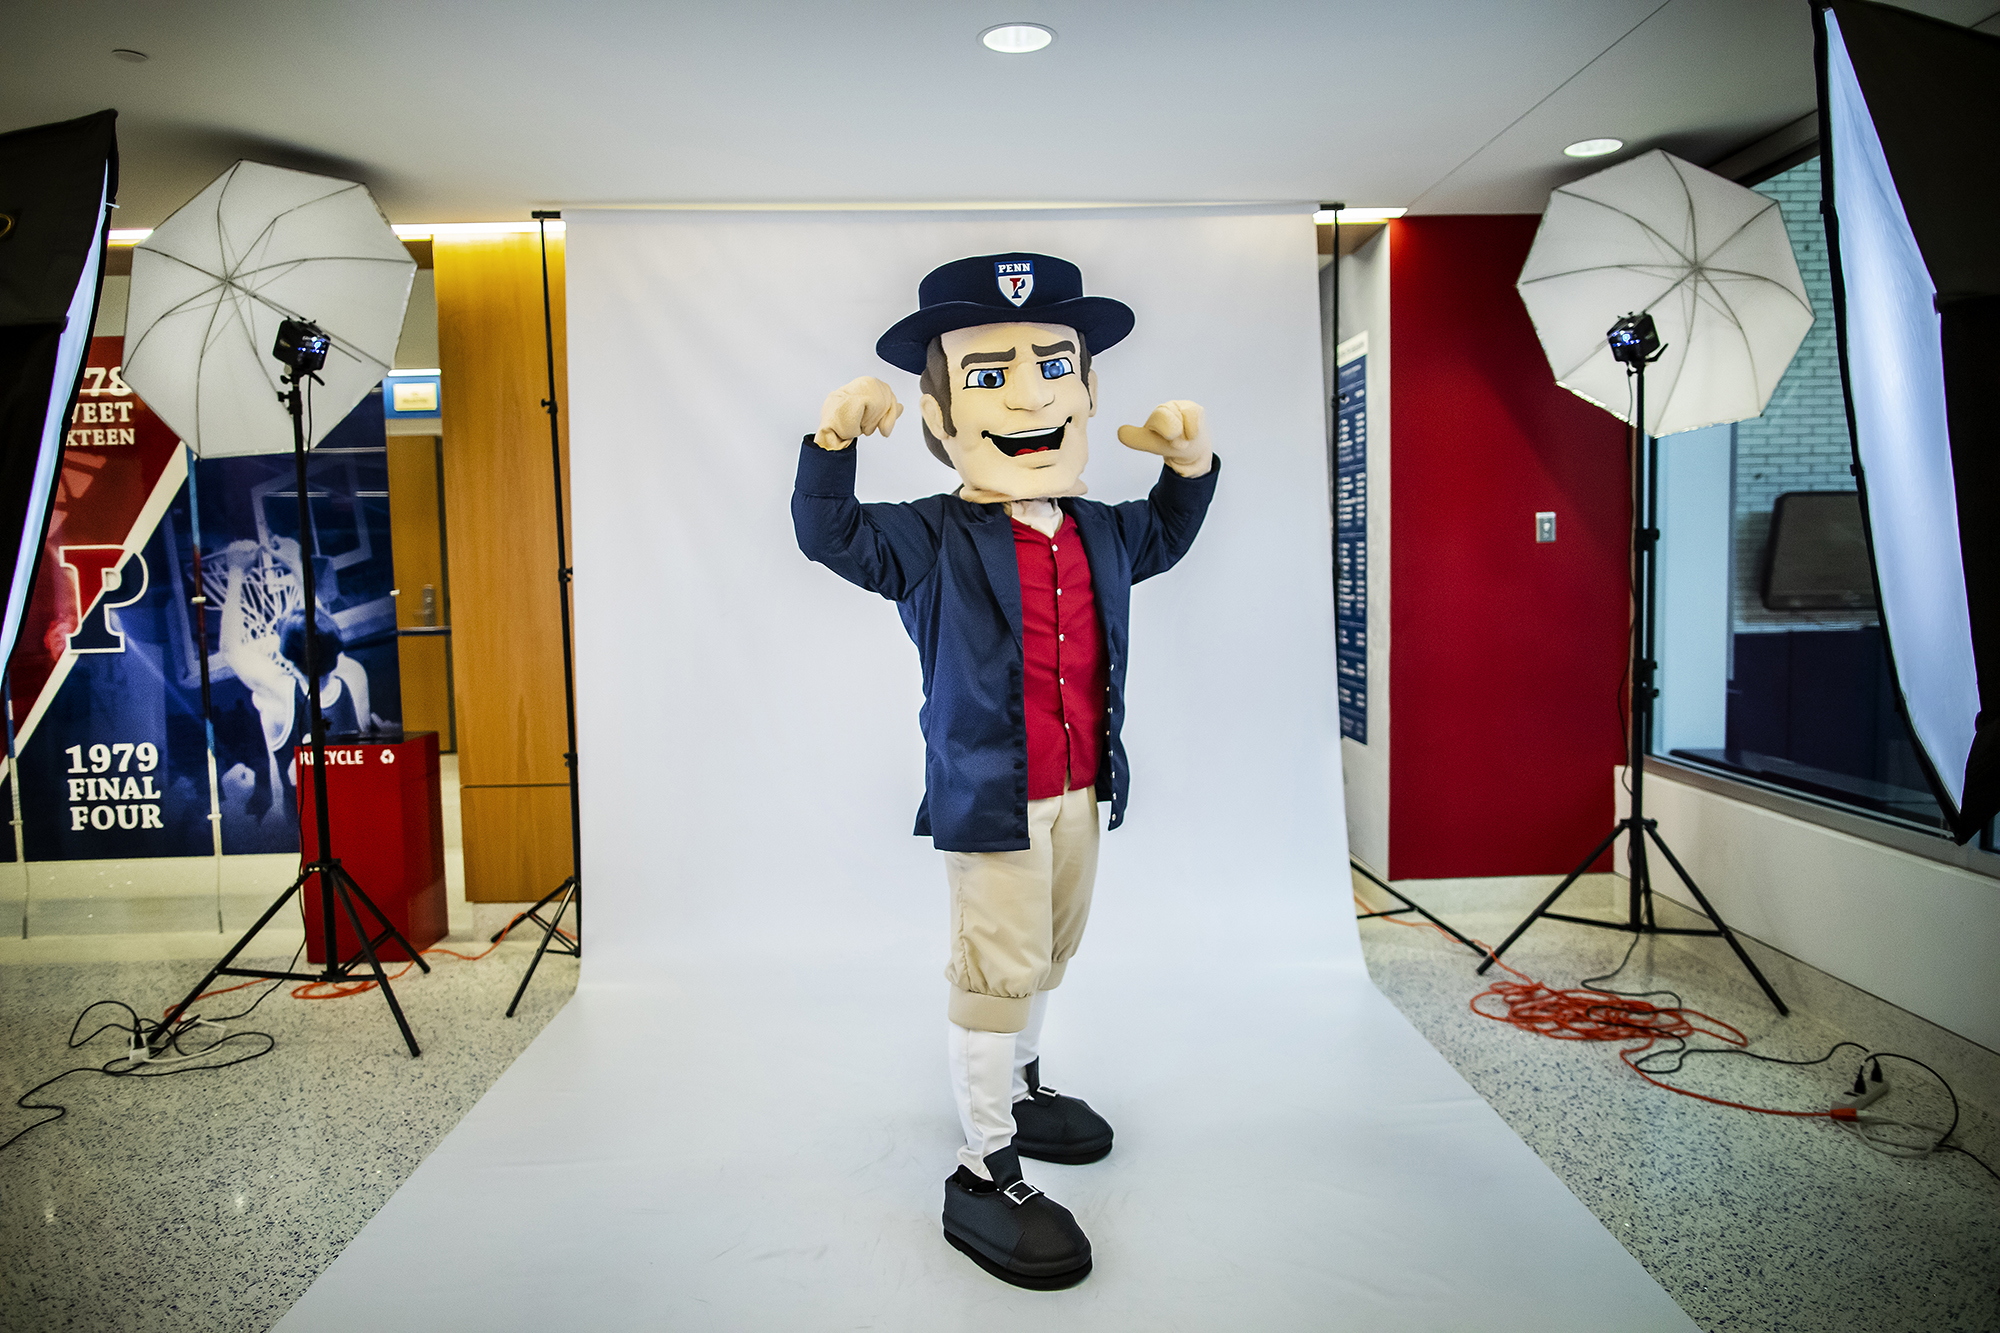 The Quaker poses showing his bicep muscles during a photo shoot.